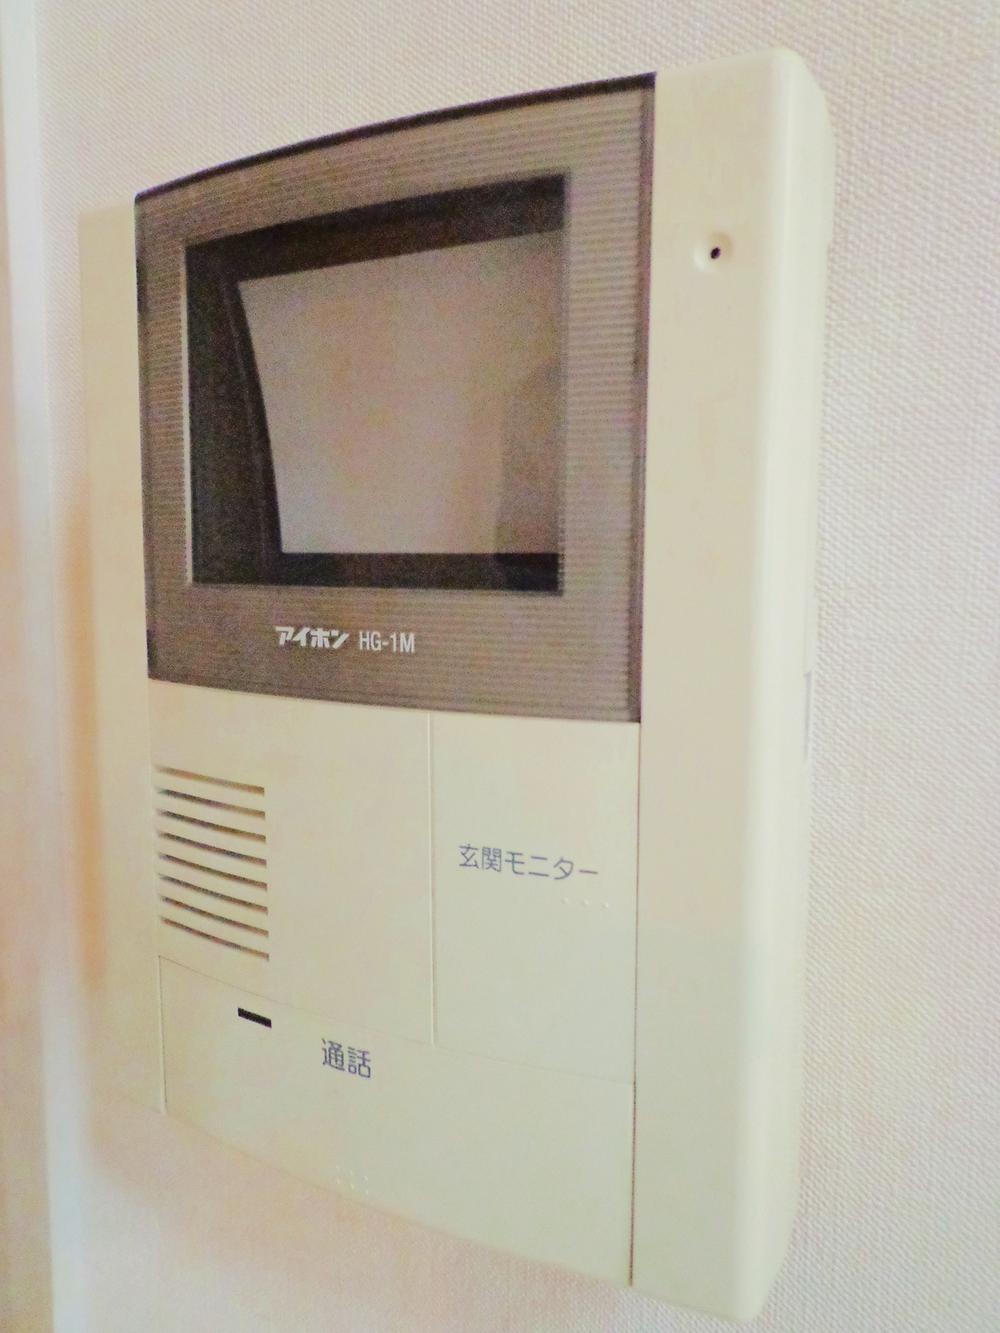 Other Equipment. Intercom with monitor. It is safe and can be confirmed is the face of the visitor. 